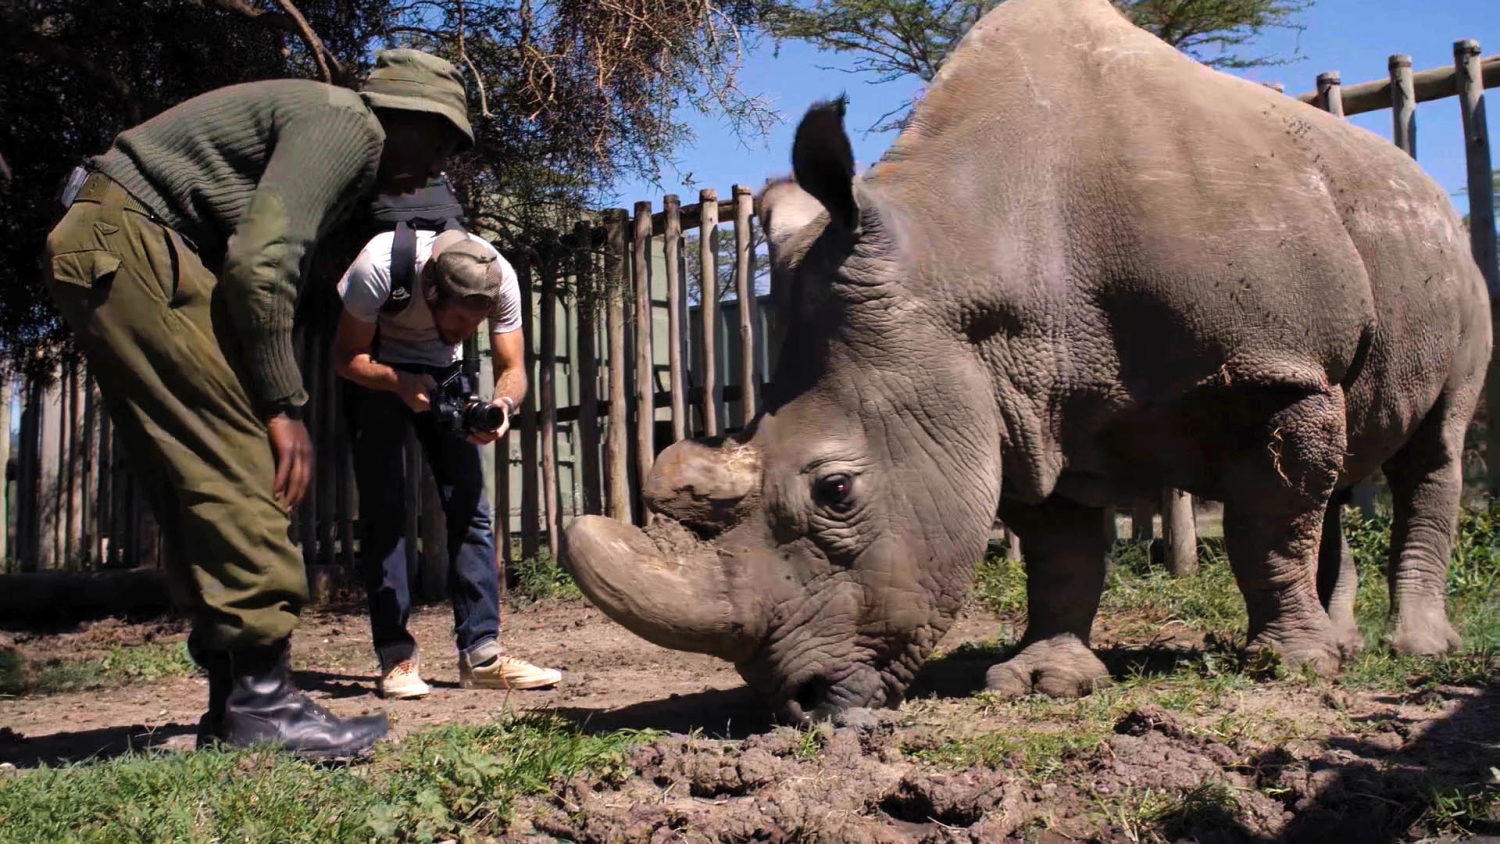 A videographer and an animal caretaker stand next to a rhino